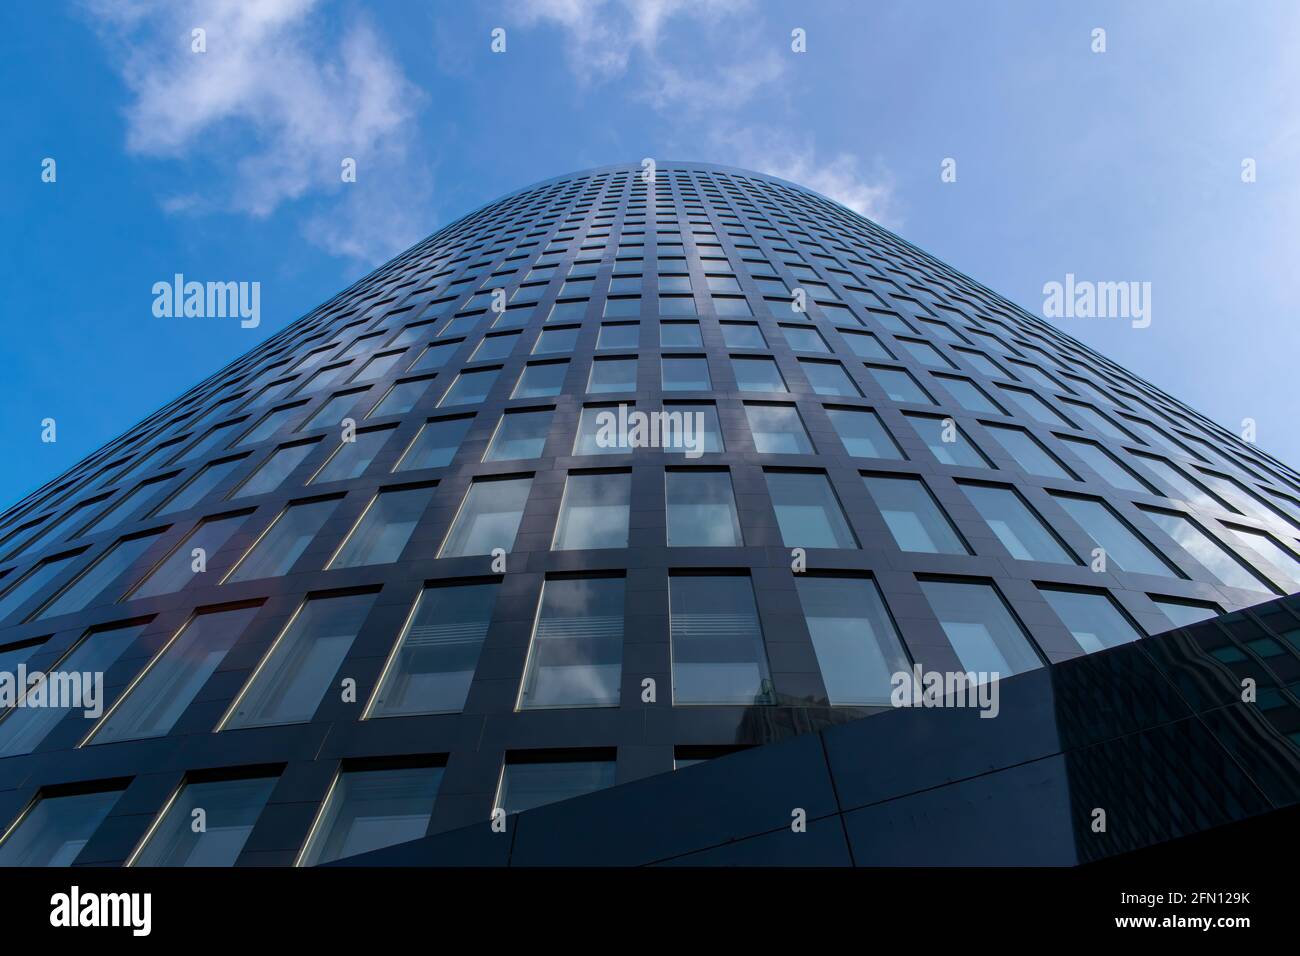 Sparda Bank High Resolution Stock Photography and Images - Alamy